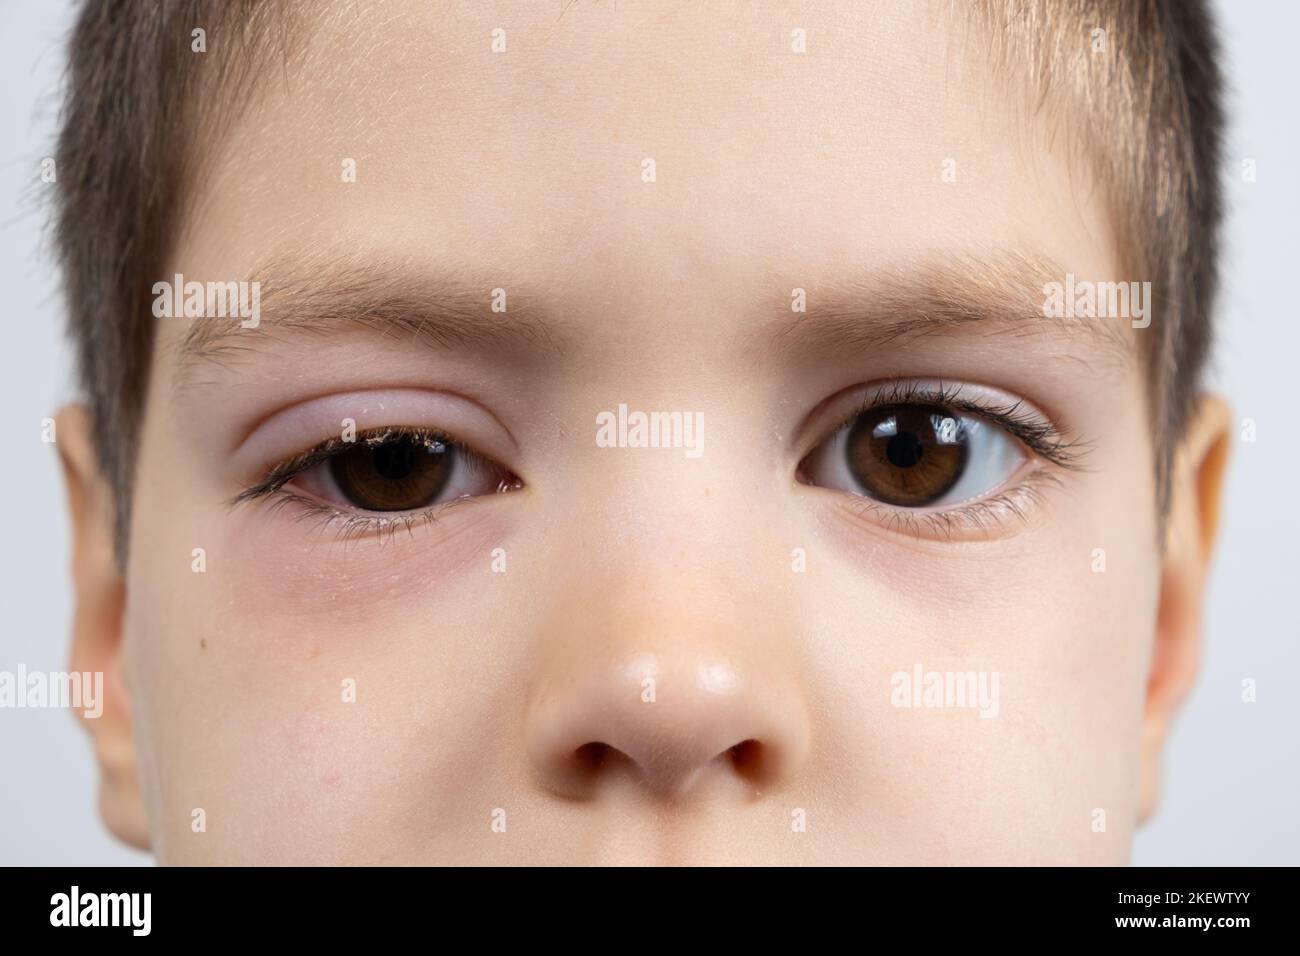 Eye of a child with conjunctivitis, inflammation of the conjunctiva, close-up. Stock Photo